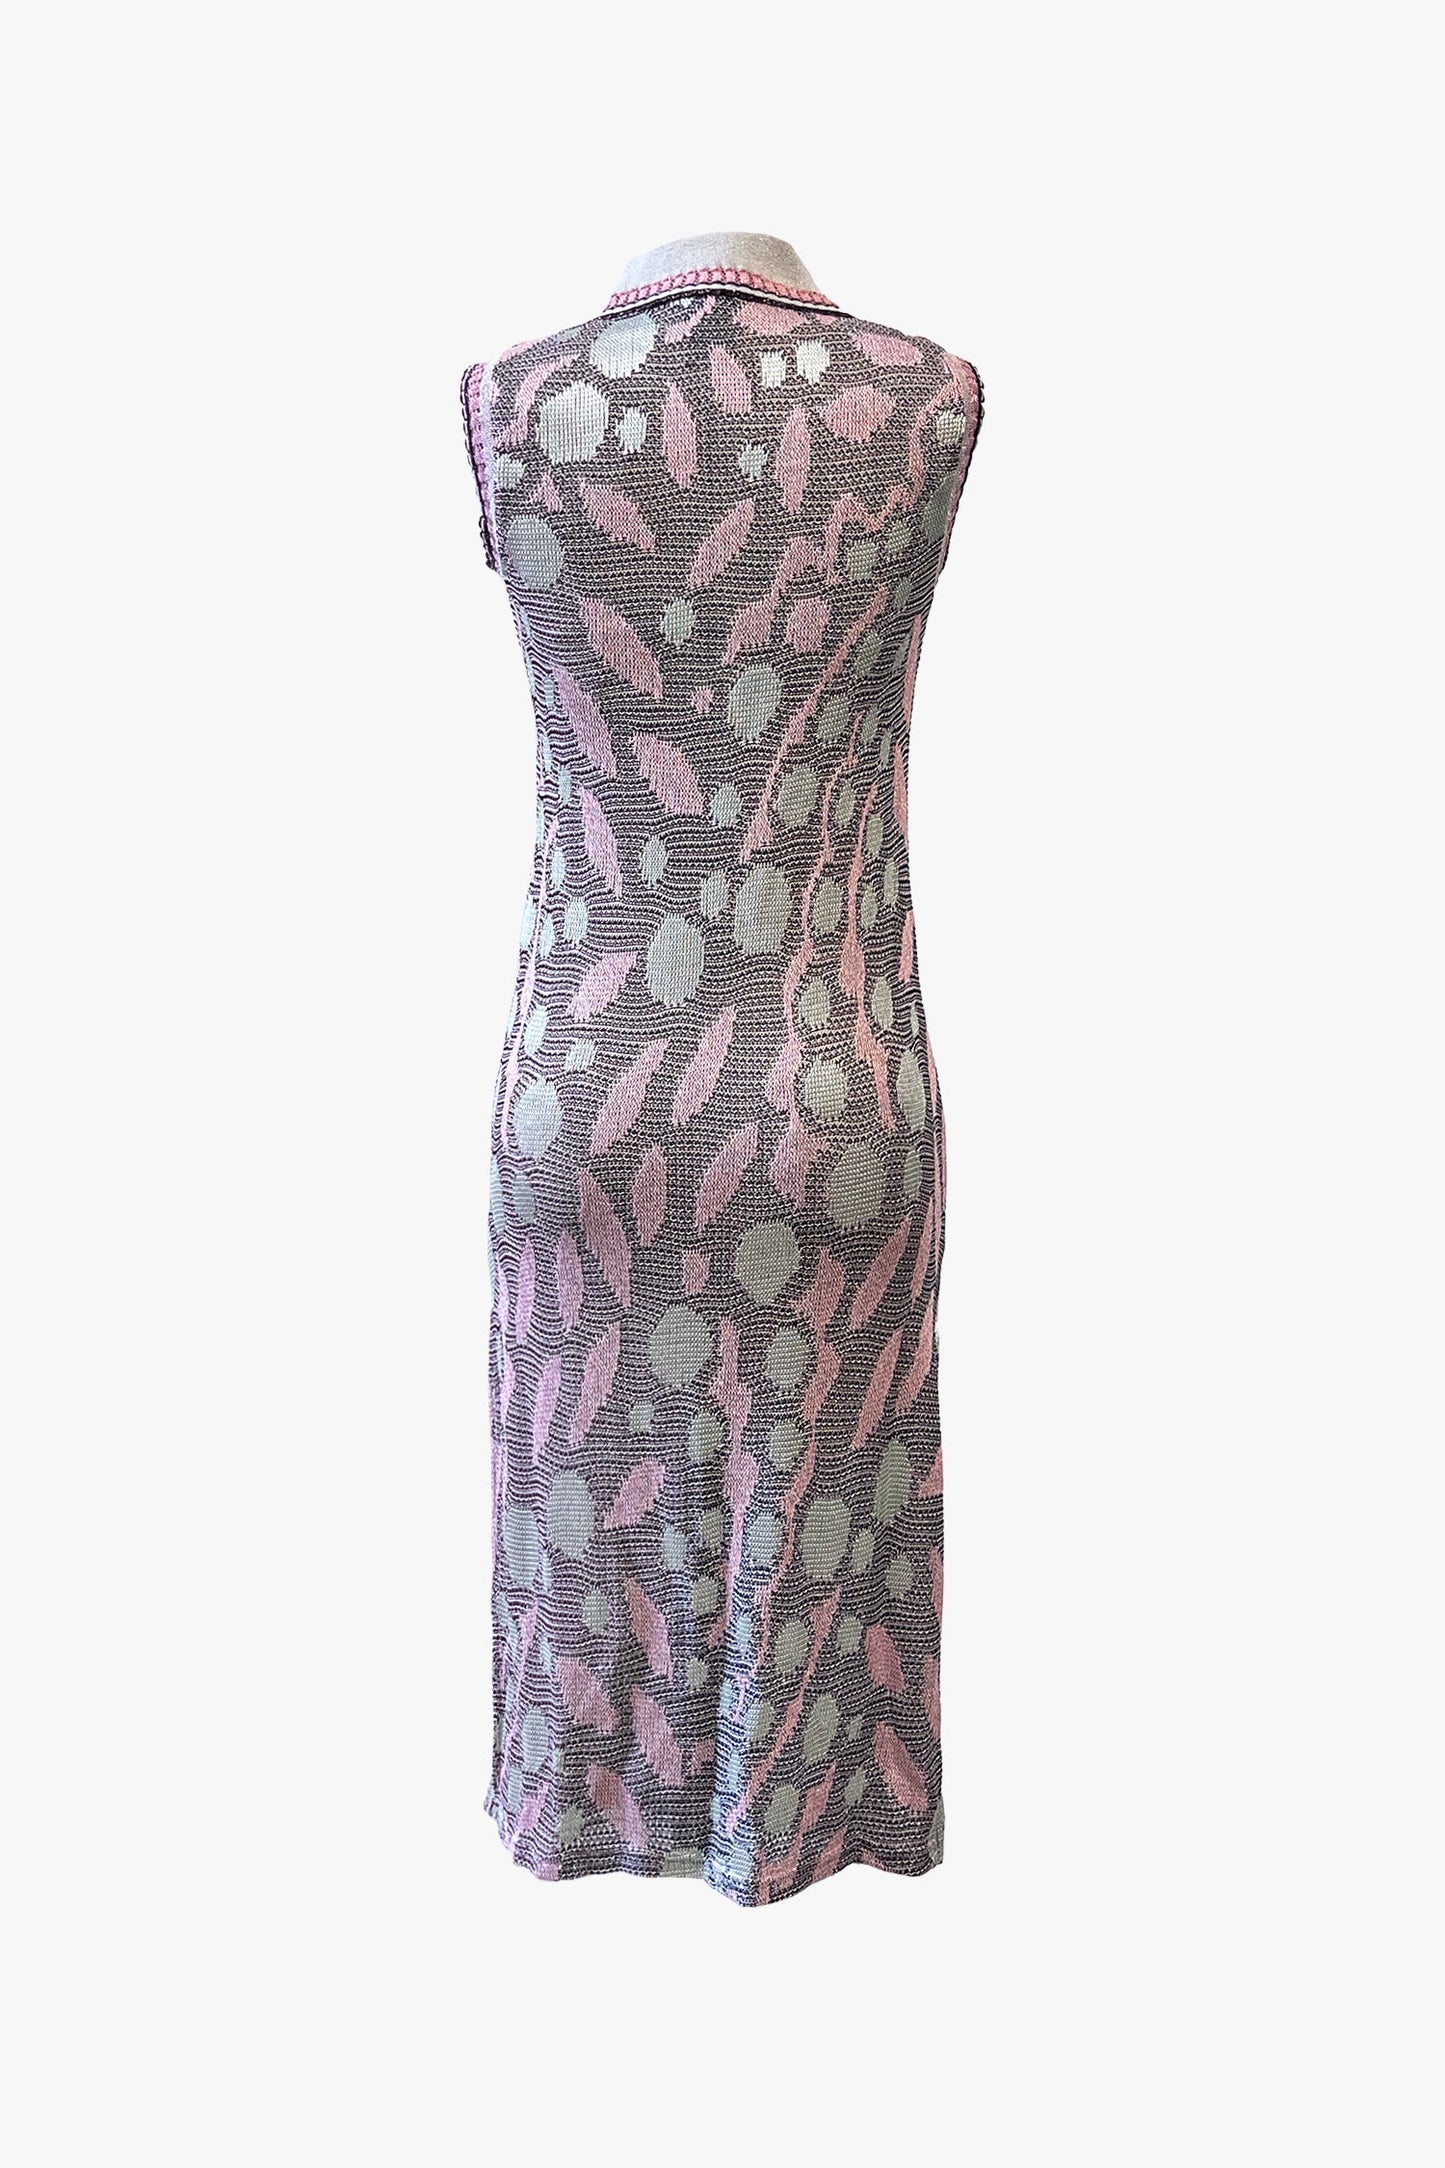 Opalescent Knit Dress, flap collar, long, sleeveless, with floral design pink/green on navy